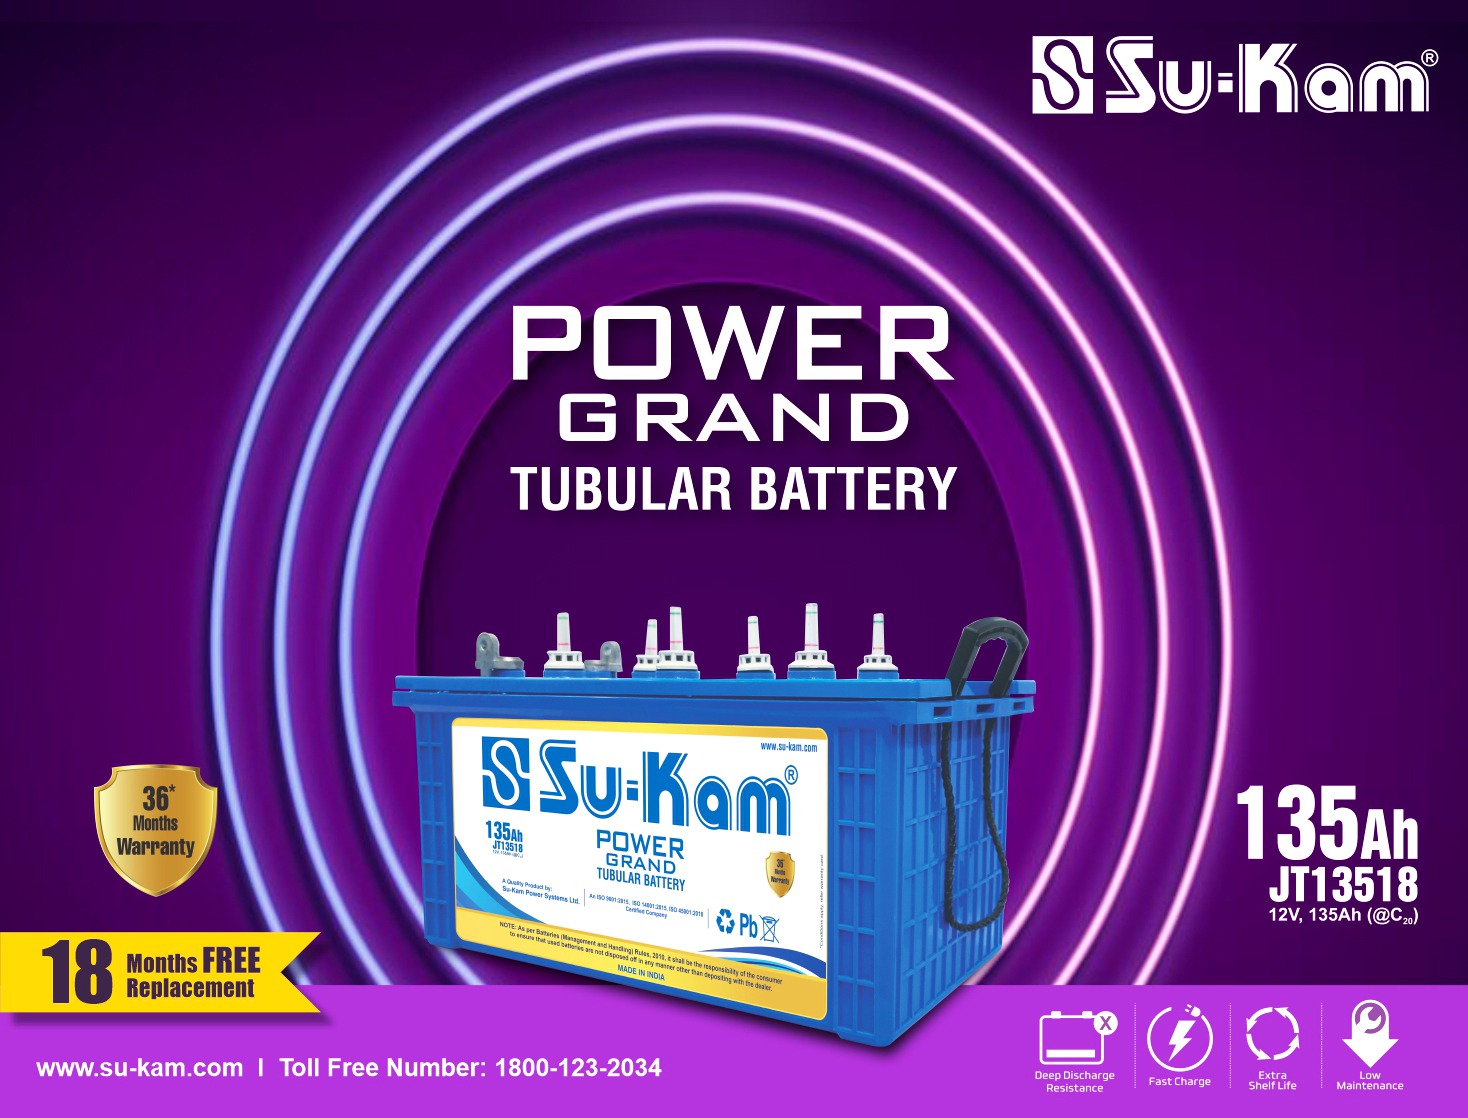 Sukam Power Grand 160 Ah Tubular Inverter Battery with 36* Months Warranty for Home, Office & Shops